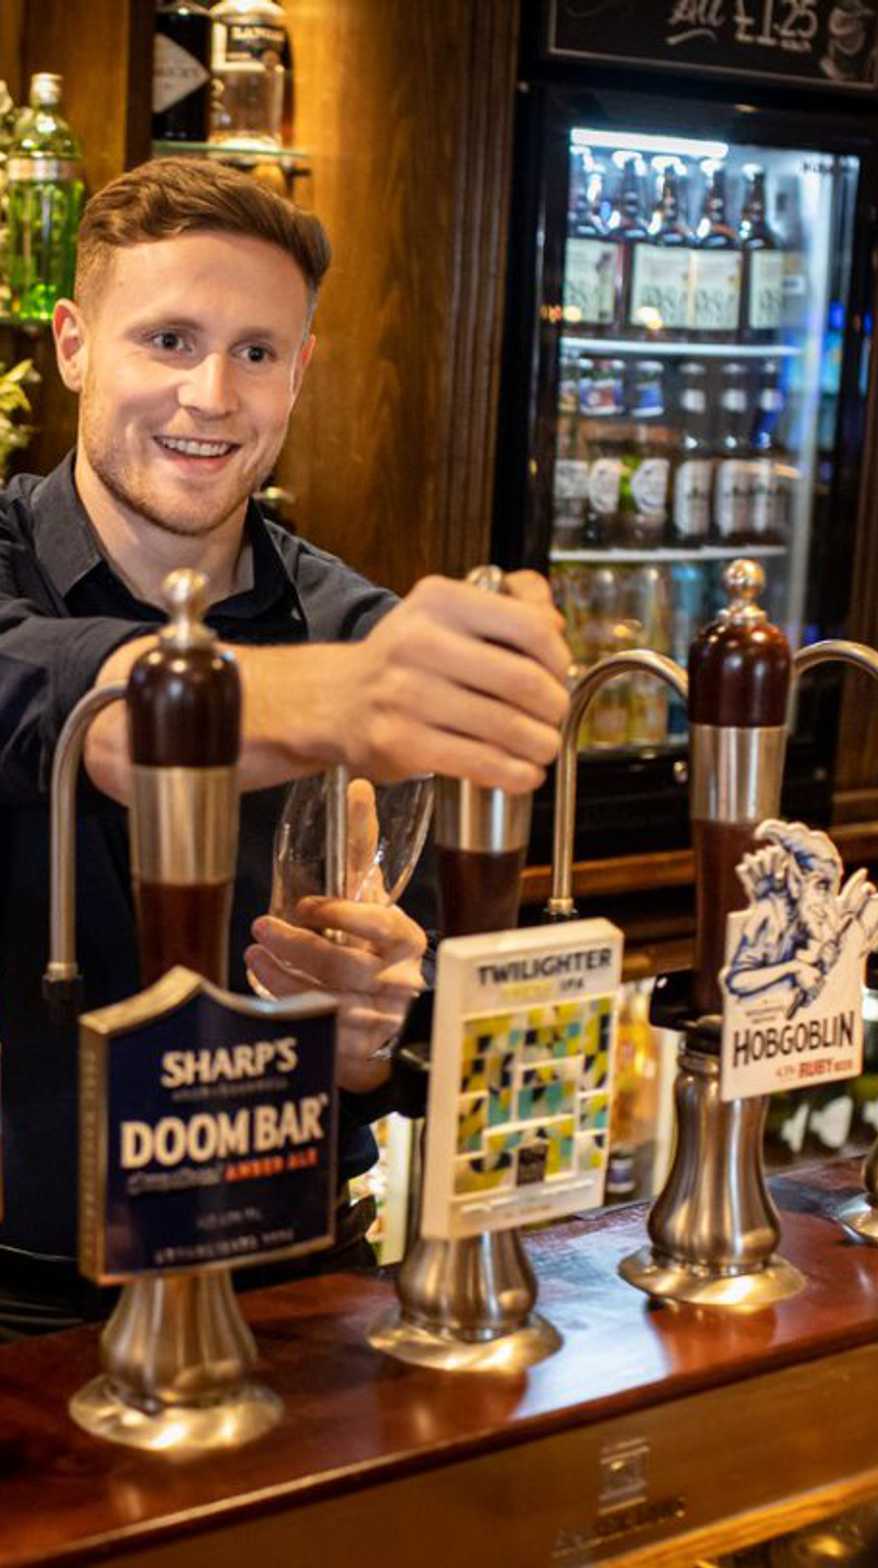 A team member behind the bar smiles at a guest while pulling them a fresh pint.